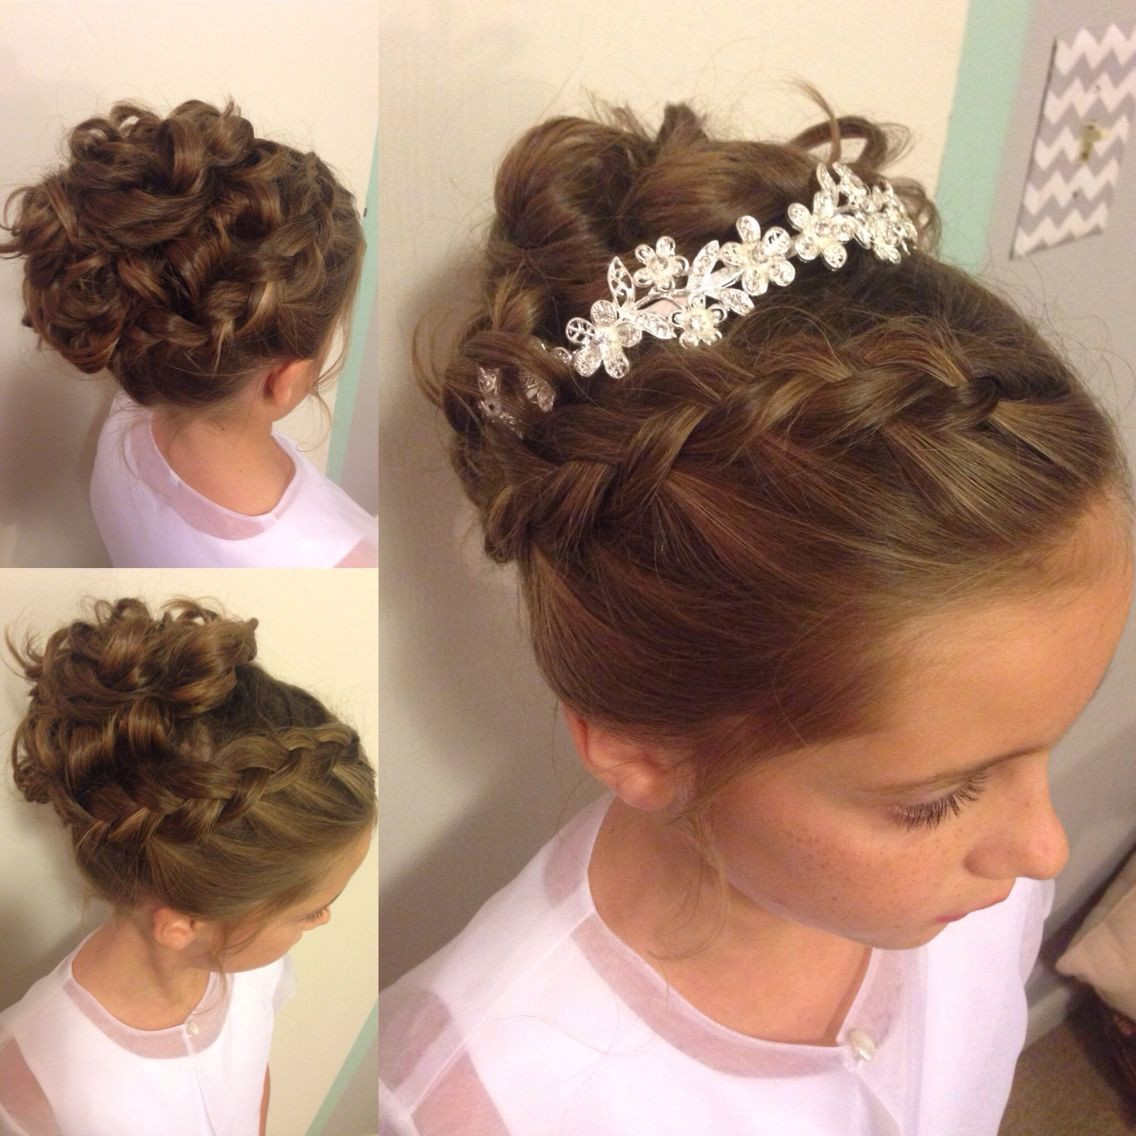 Wedding Hairstyles For Toddlers
 Little girl updo Wedding hairstyle Instagram